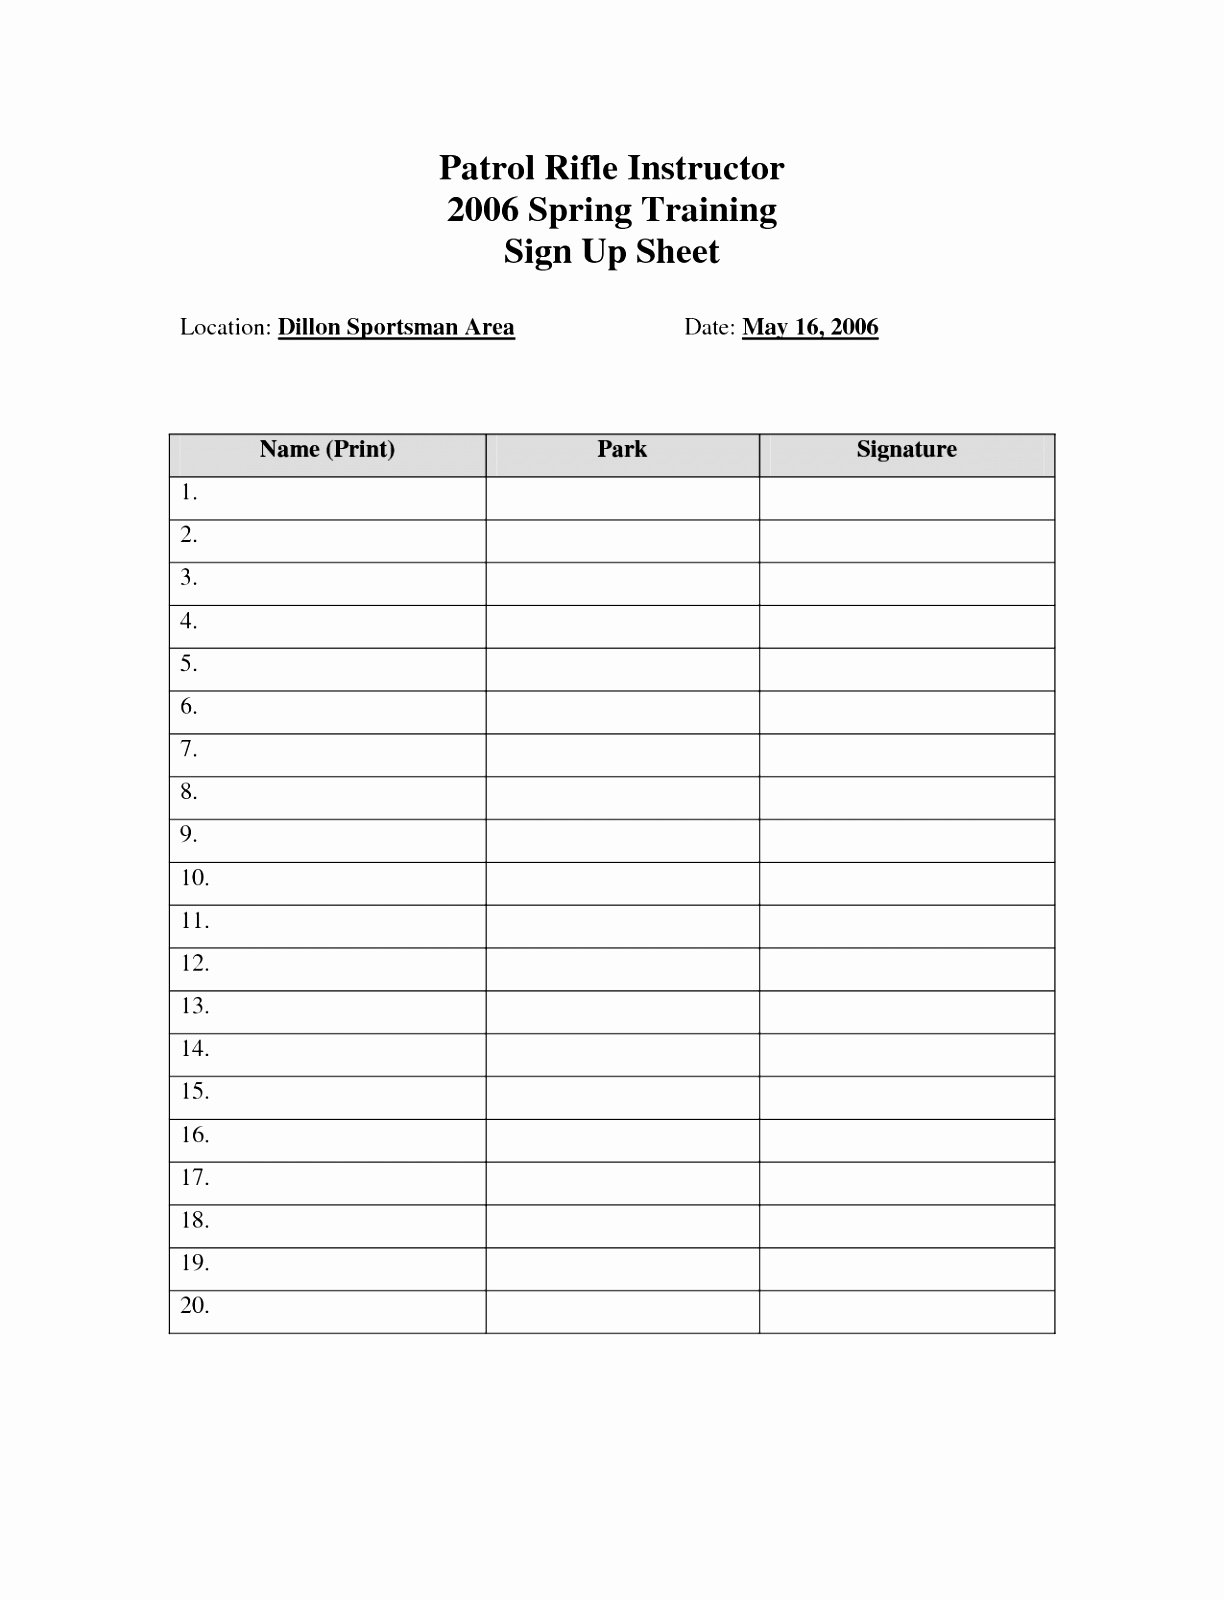 Sign In Sheet Template Doc Unique Project Sign F Tempalte Example Sign F Sheet Template